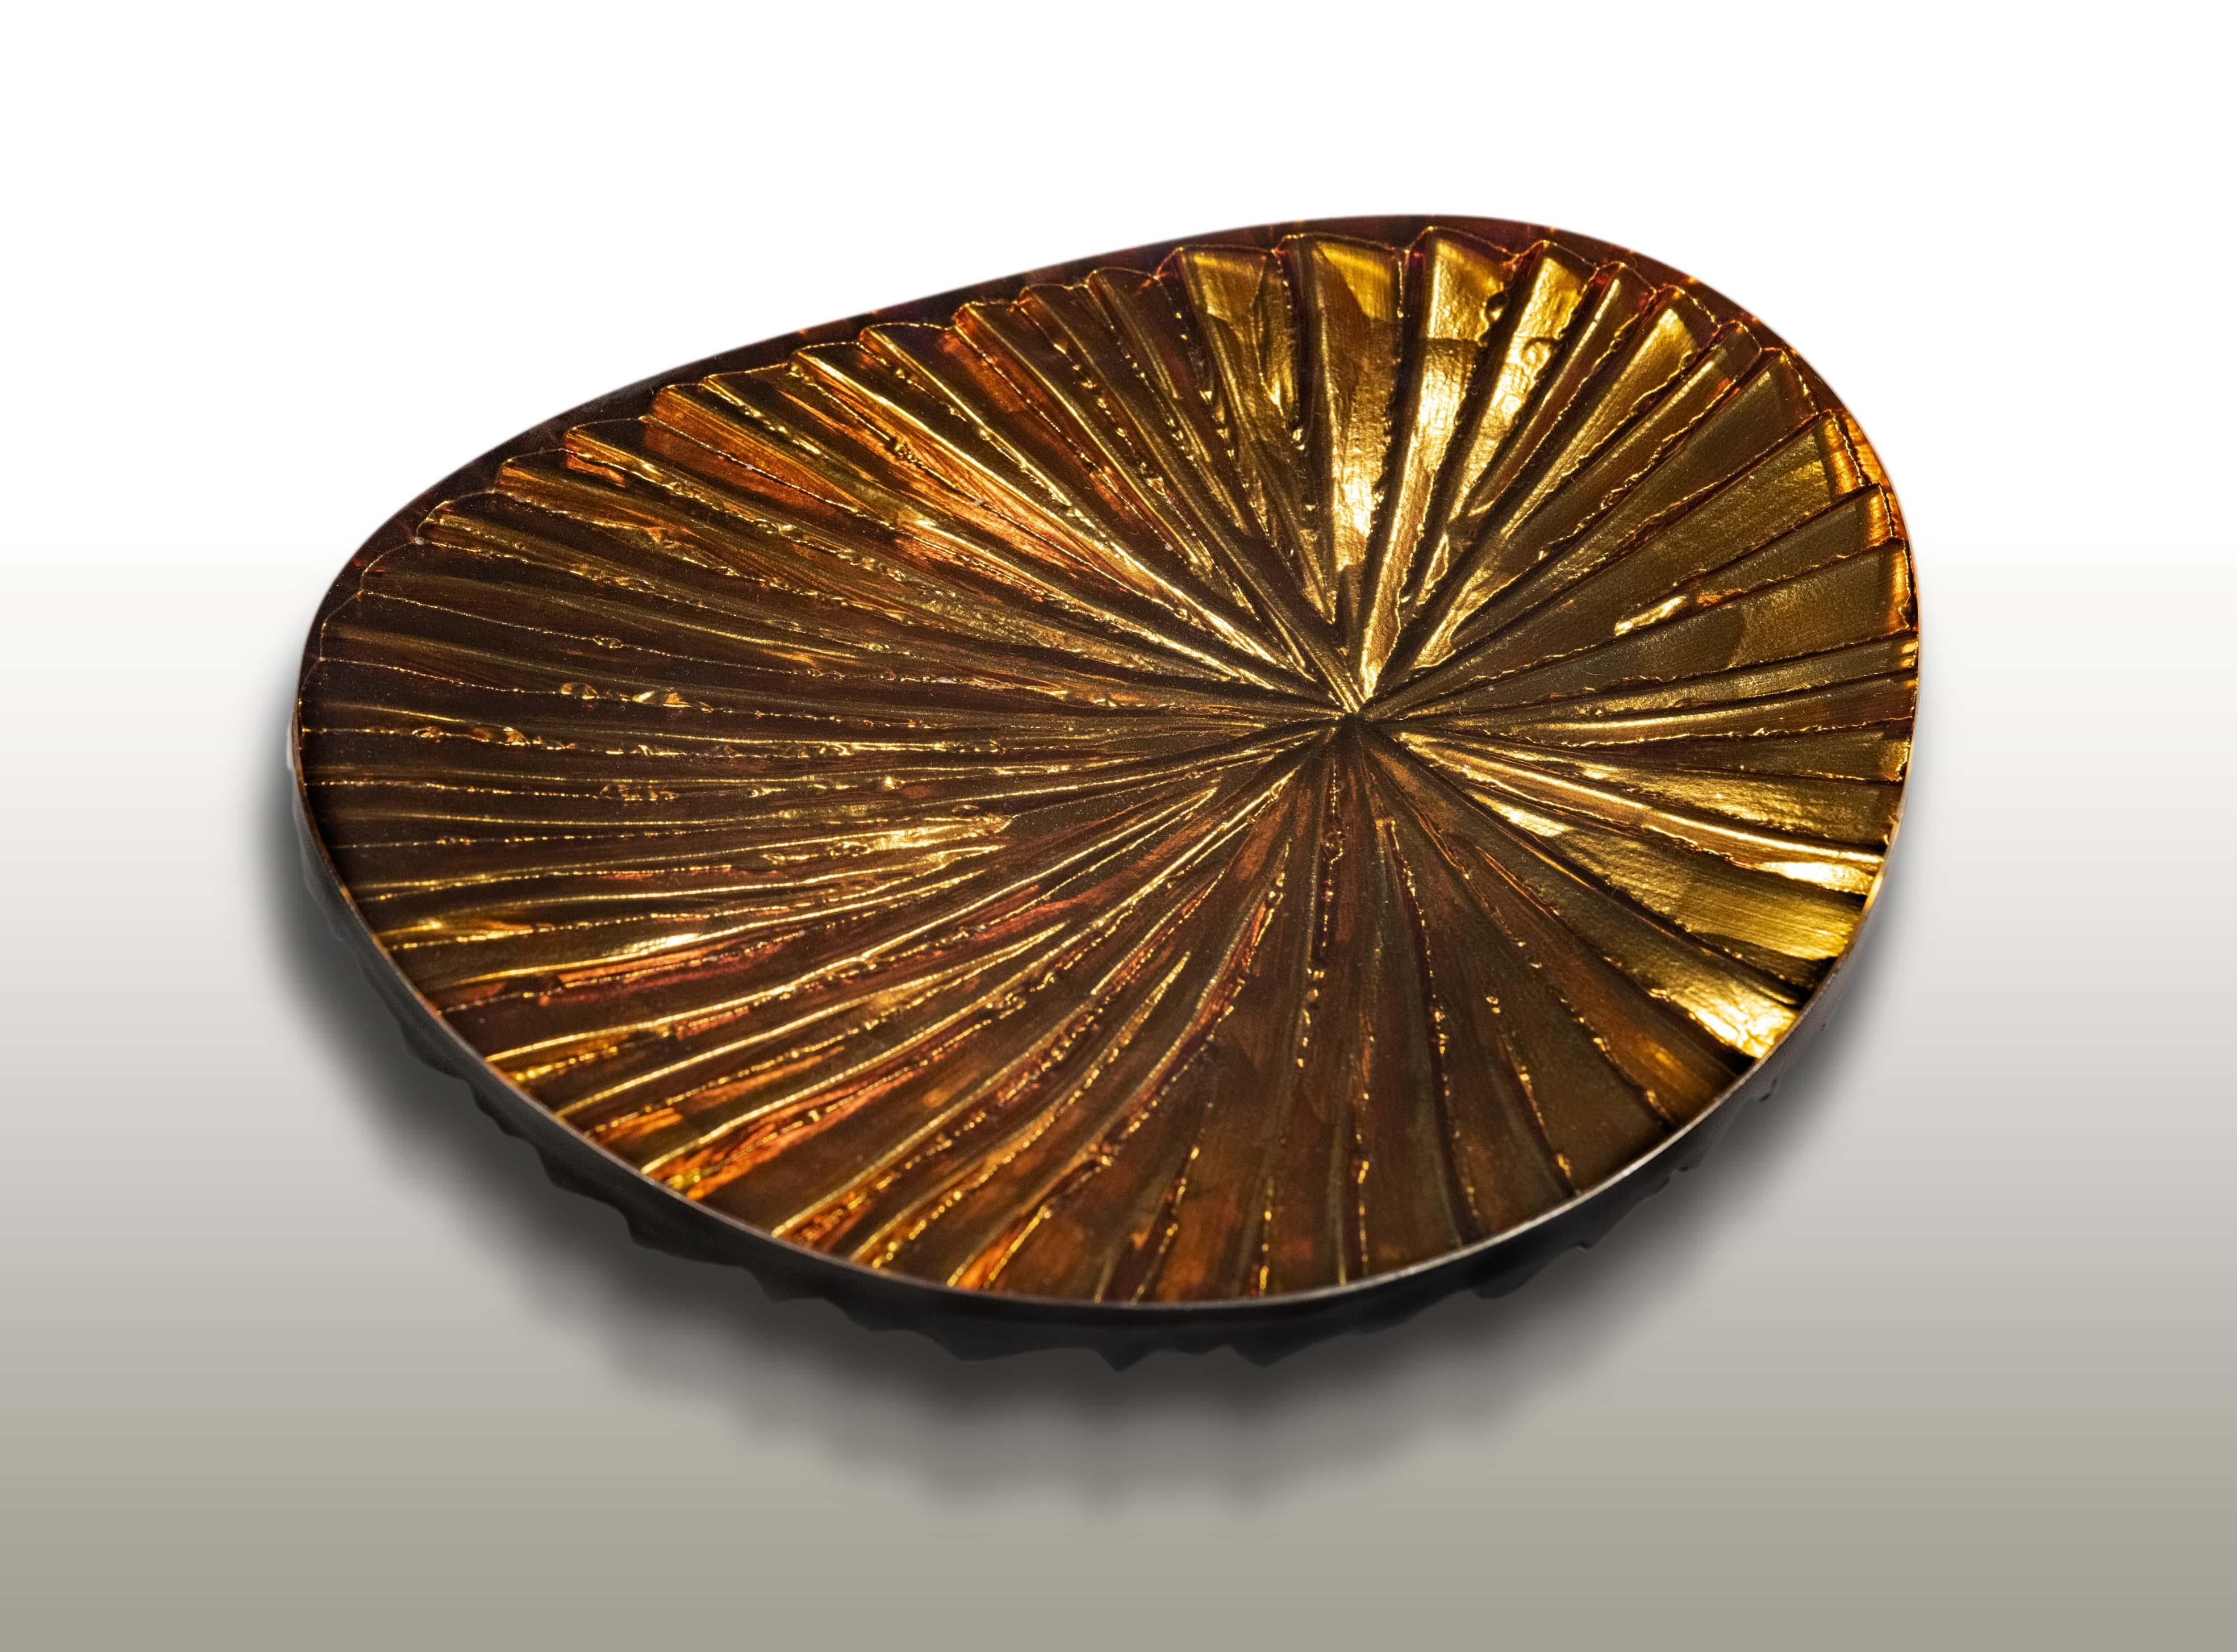 Italian Contemporary 'Oasi' Set of Six Crystal Bowls Amber and Gold by Ghirò Studio For Sale